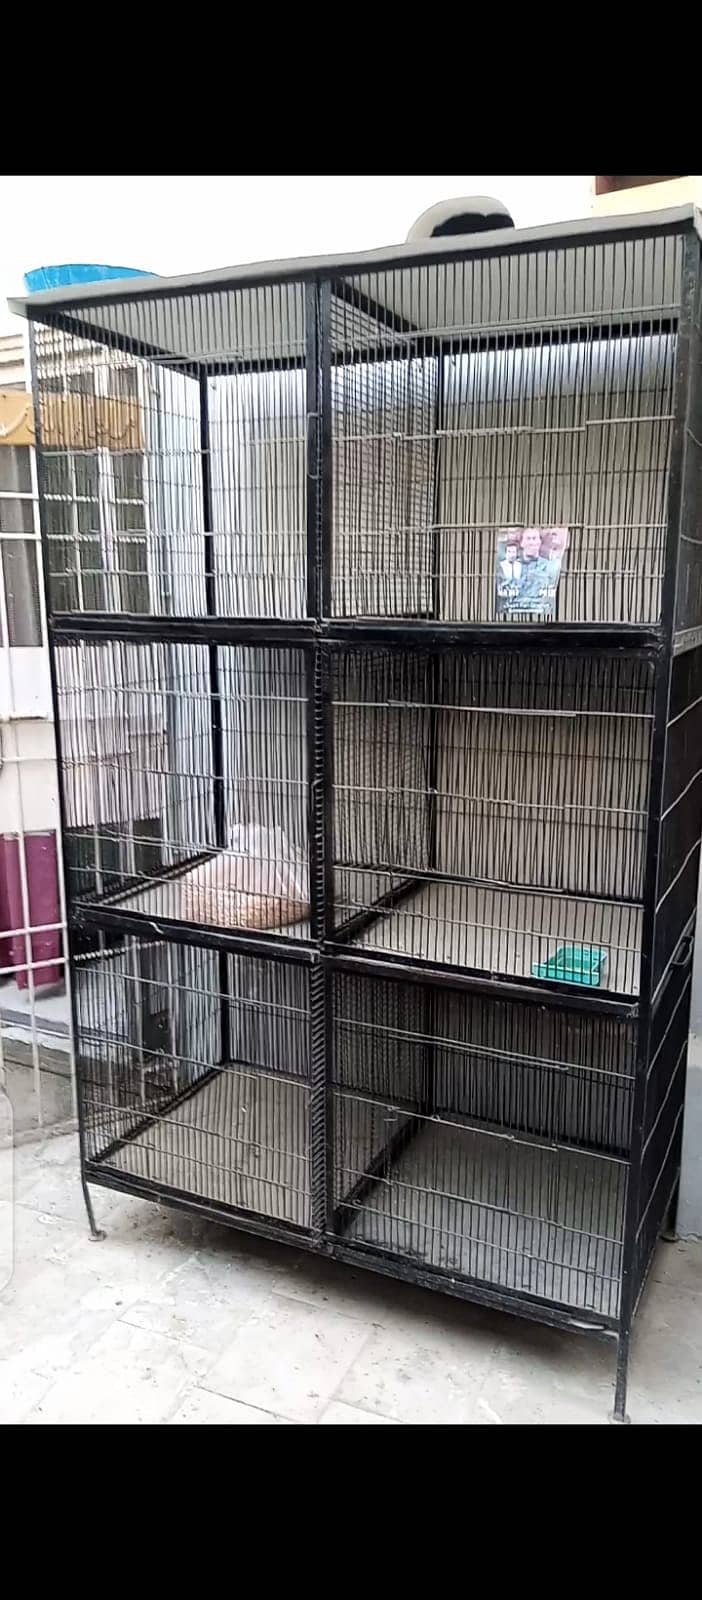 14 WIRE STRONG CAGE LOCATION NORTH KARACHI NEW PRICE 30K ALMOST 0